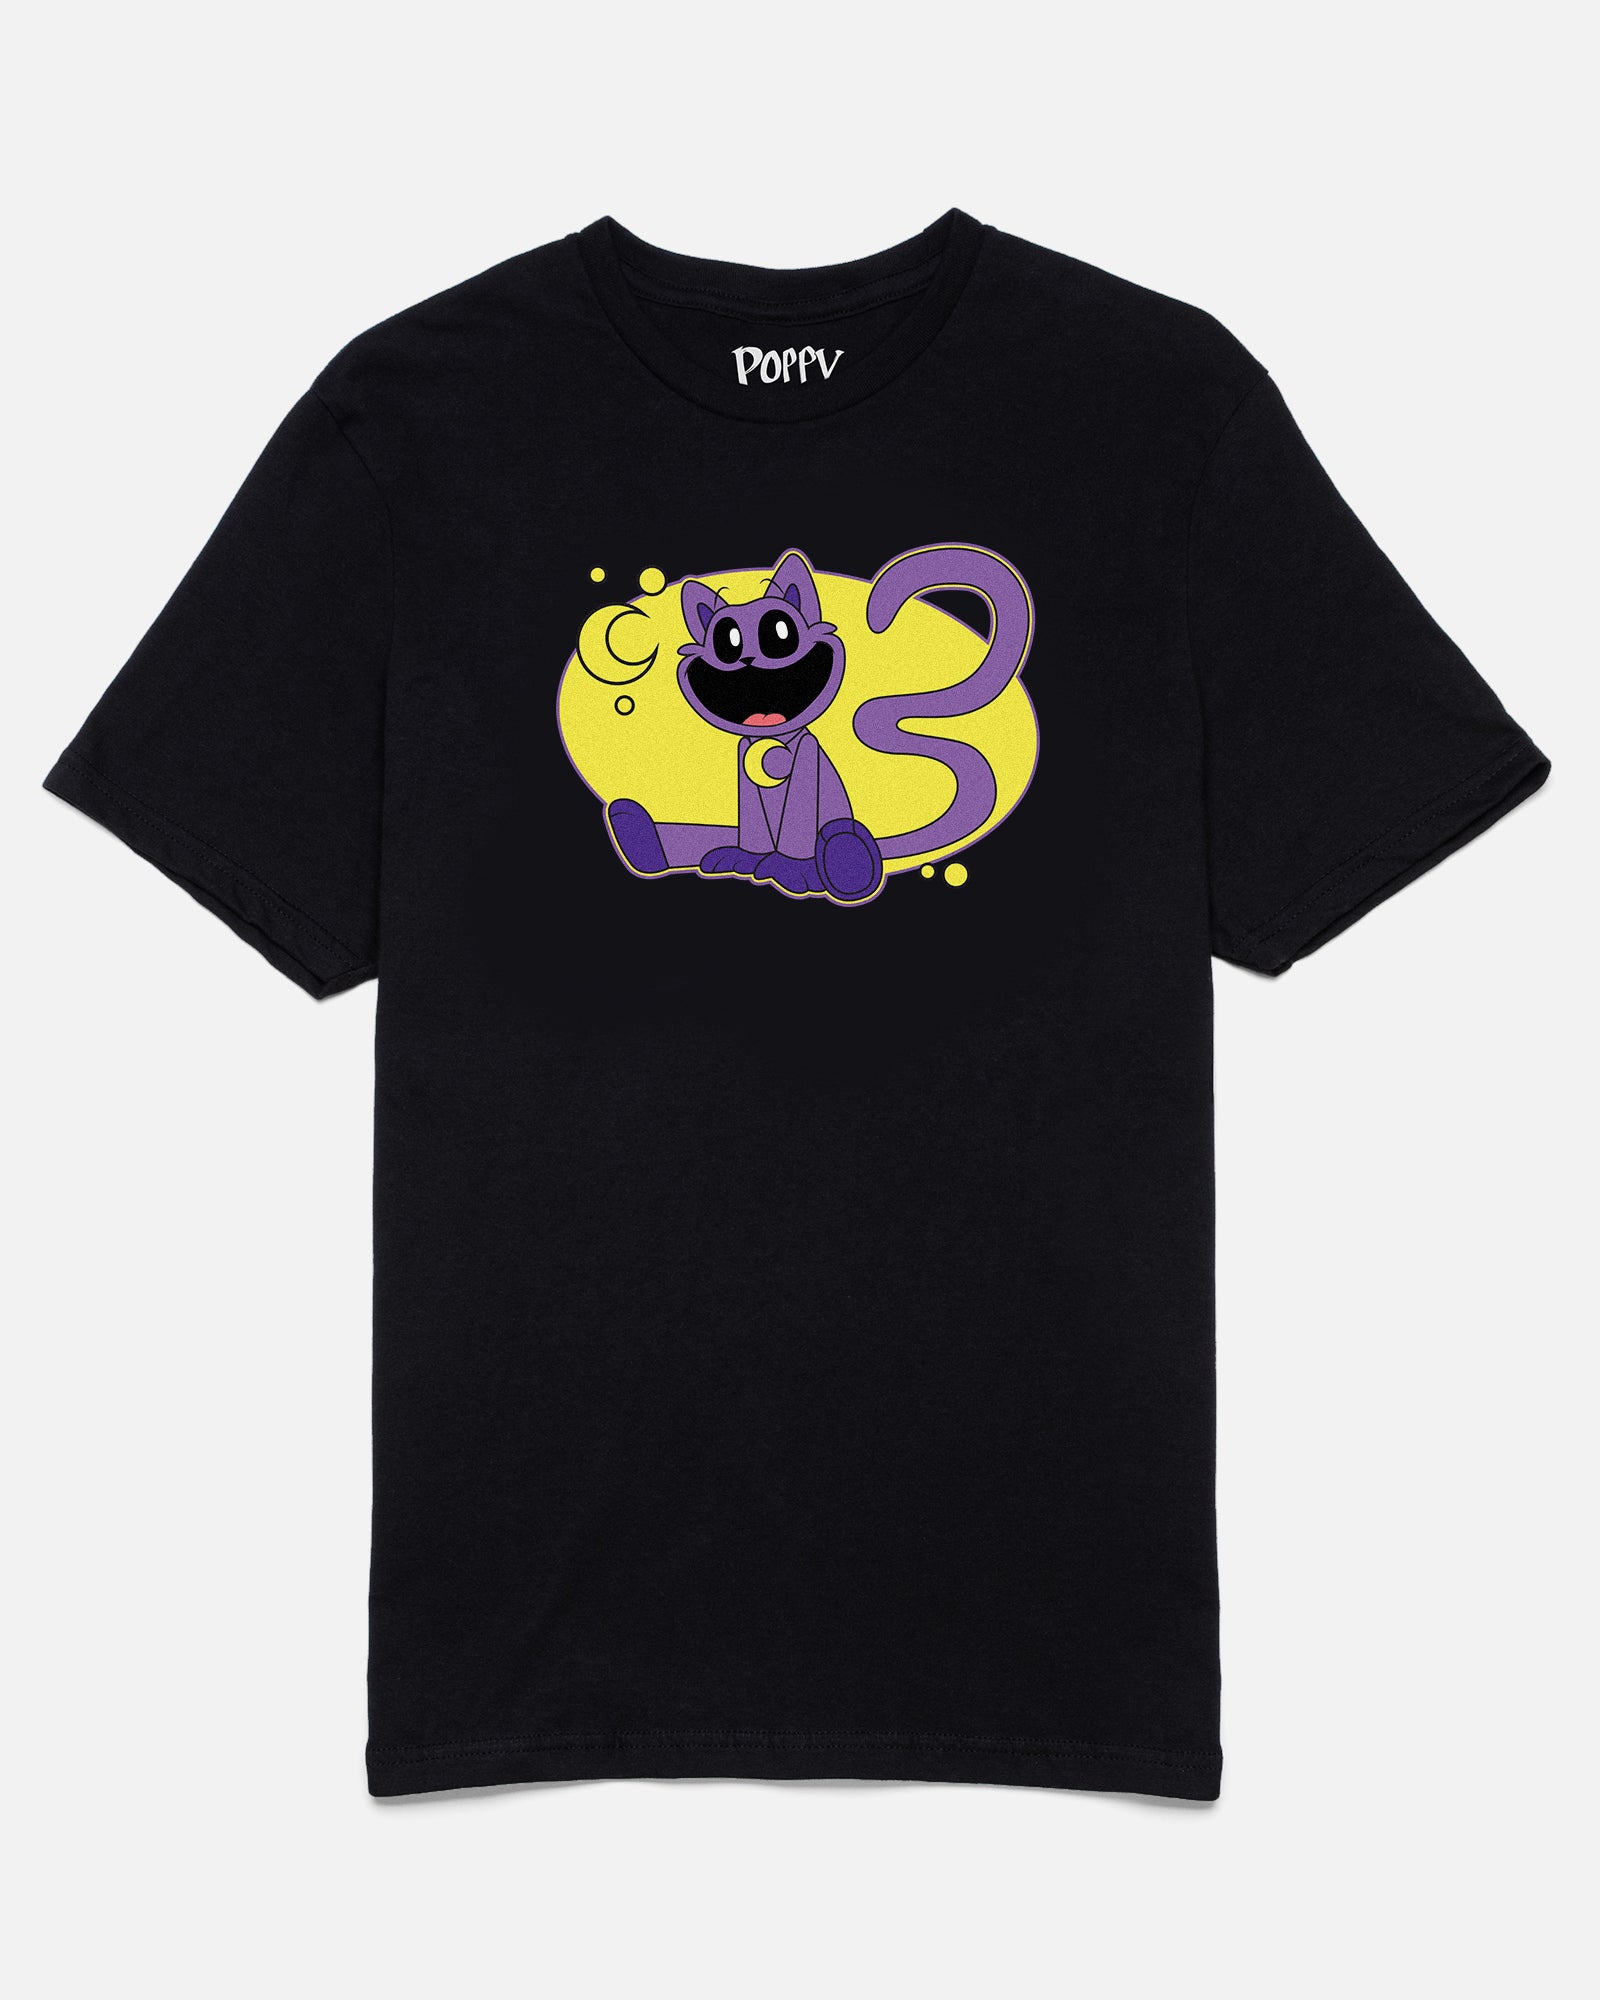 catnap smiling critters tee. image: cat sitting down with long tail wearing moon charm. moon and spots around him.